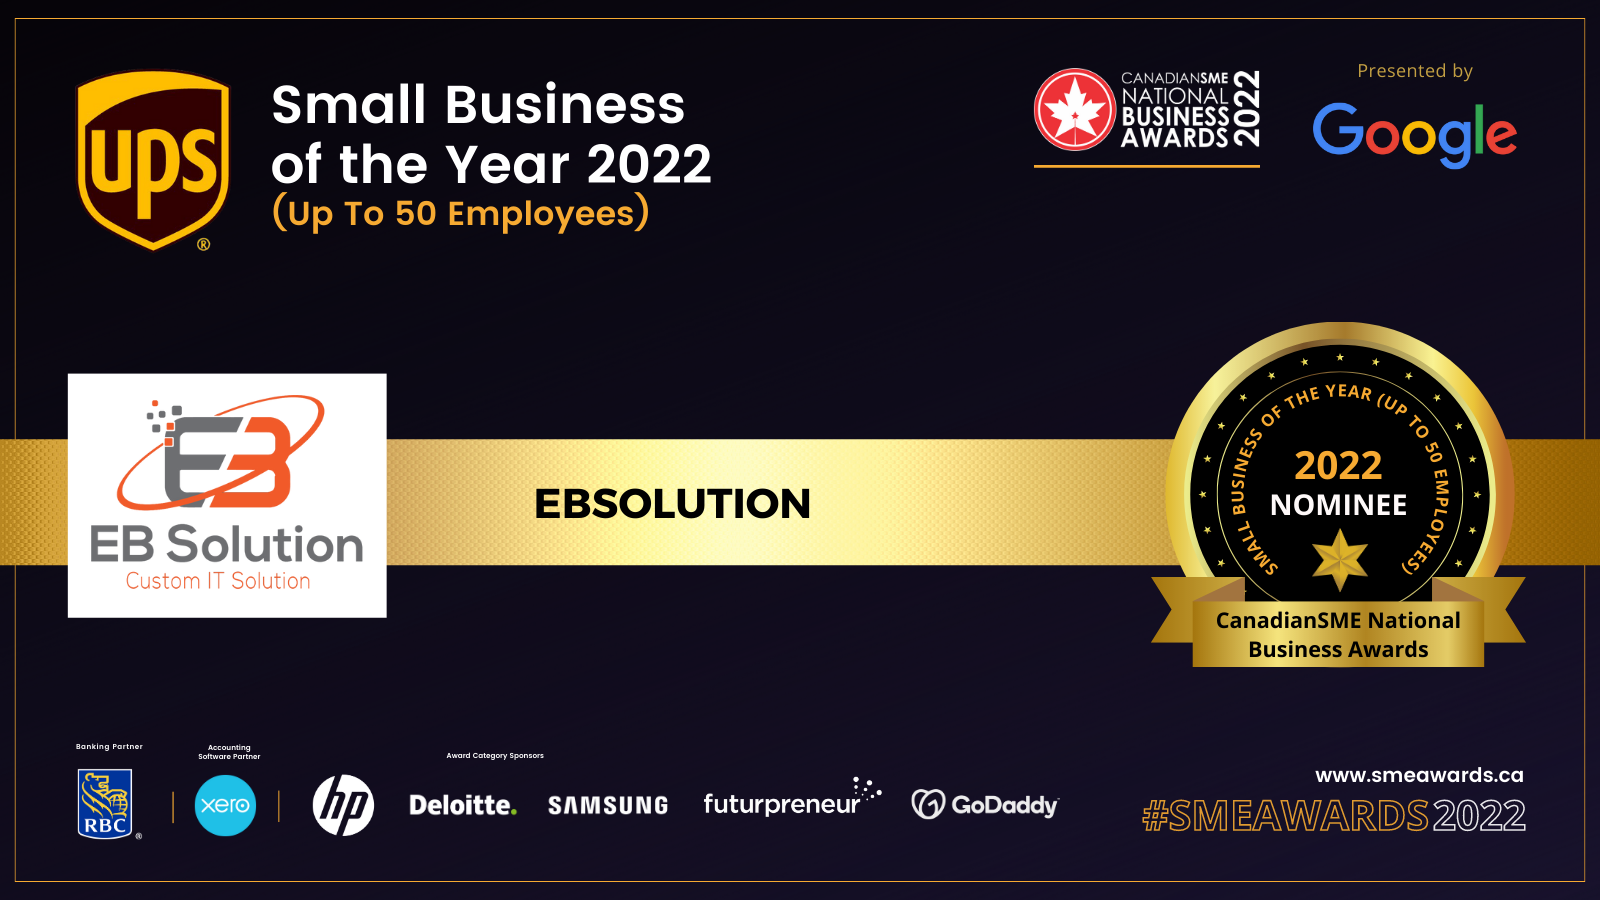 Small Business of the Year 2022 Award